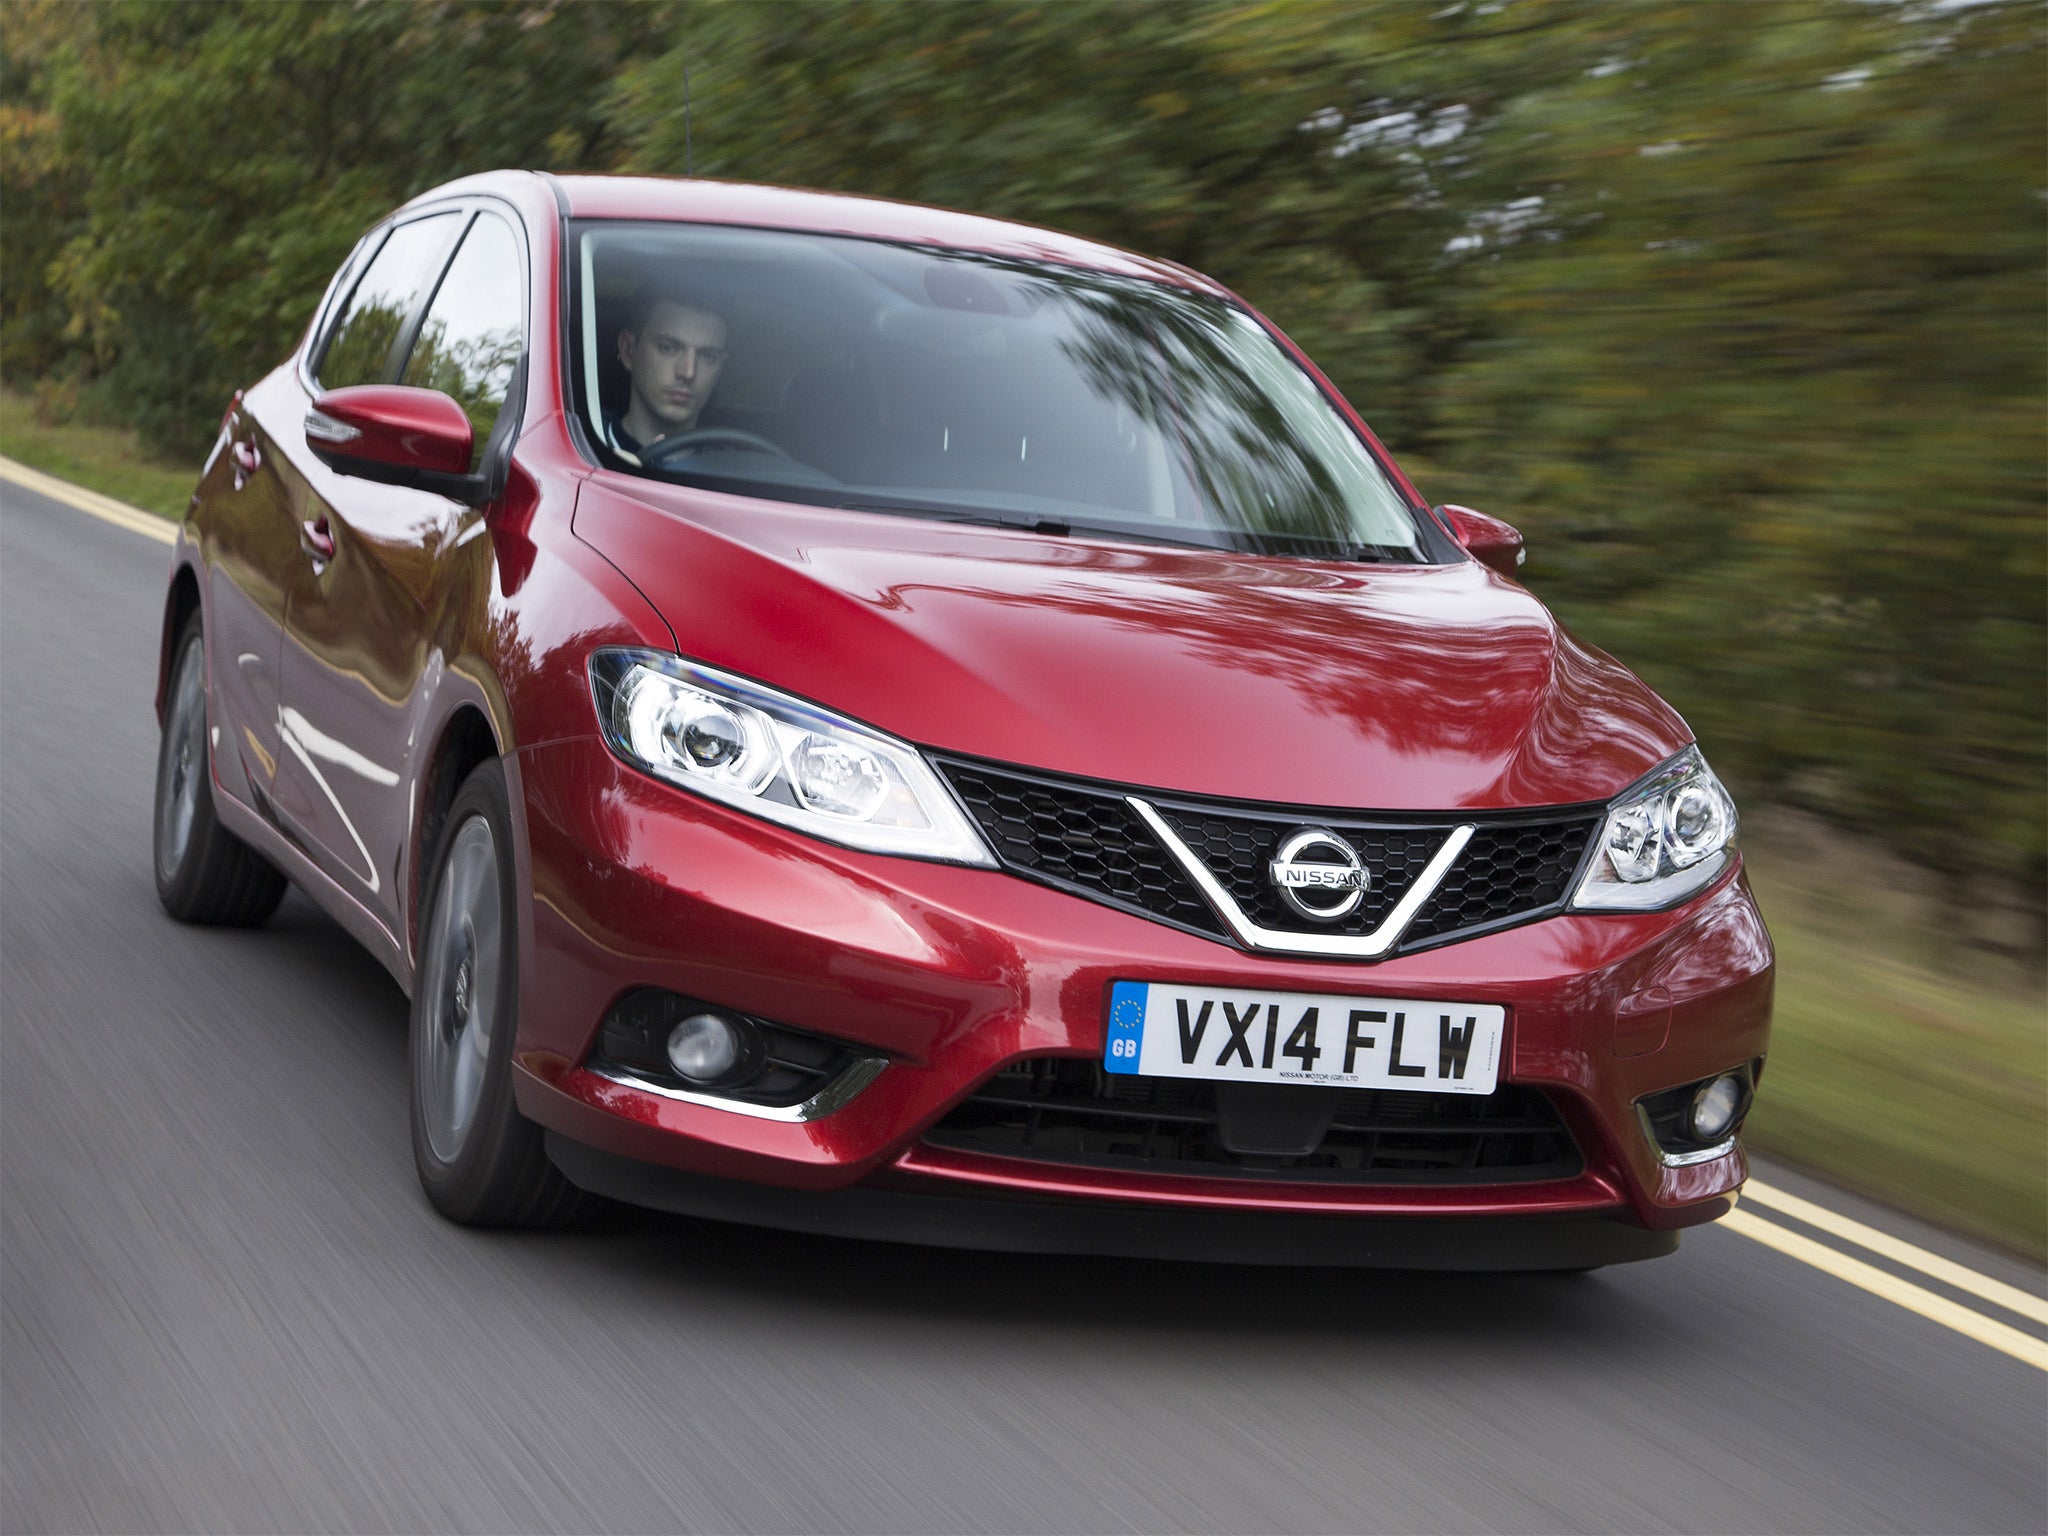 'Design by numbers': the new Nissan Pulsar